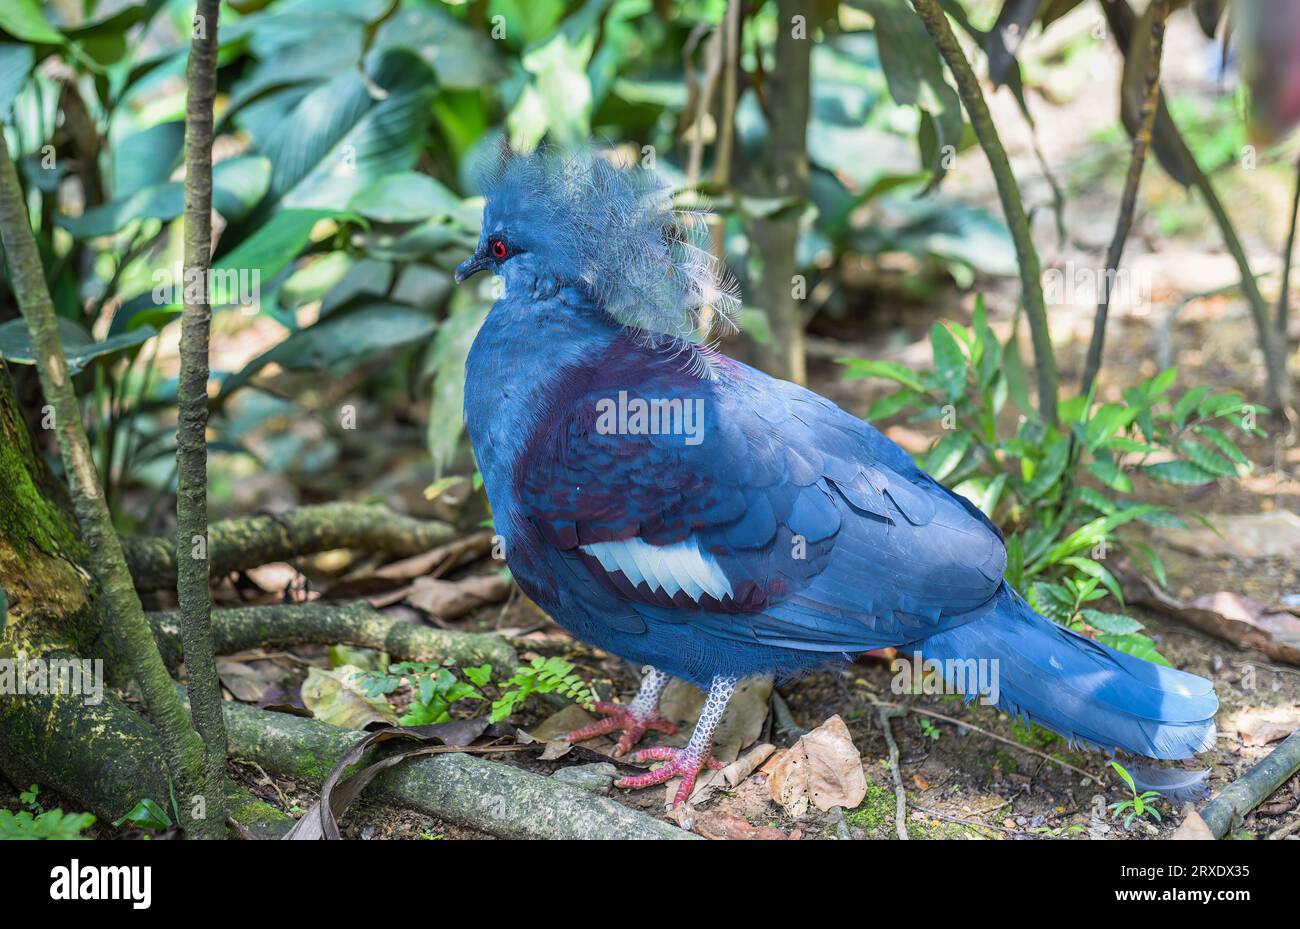 The western crowned pigeon (Goura cristata), also known as the common crowned pigeon or blue crowned pigeon in Kuala Lumpur, Malaysia Stock Photo